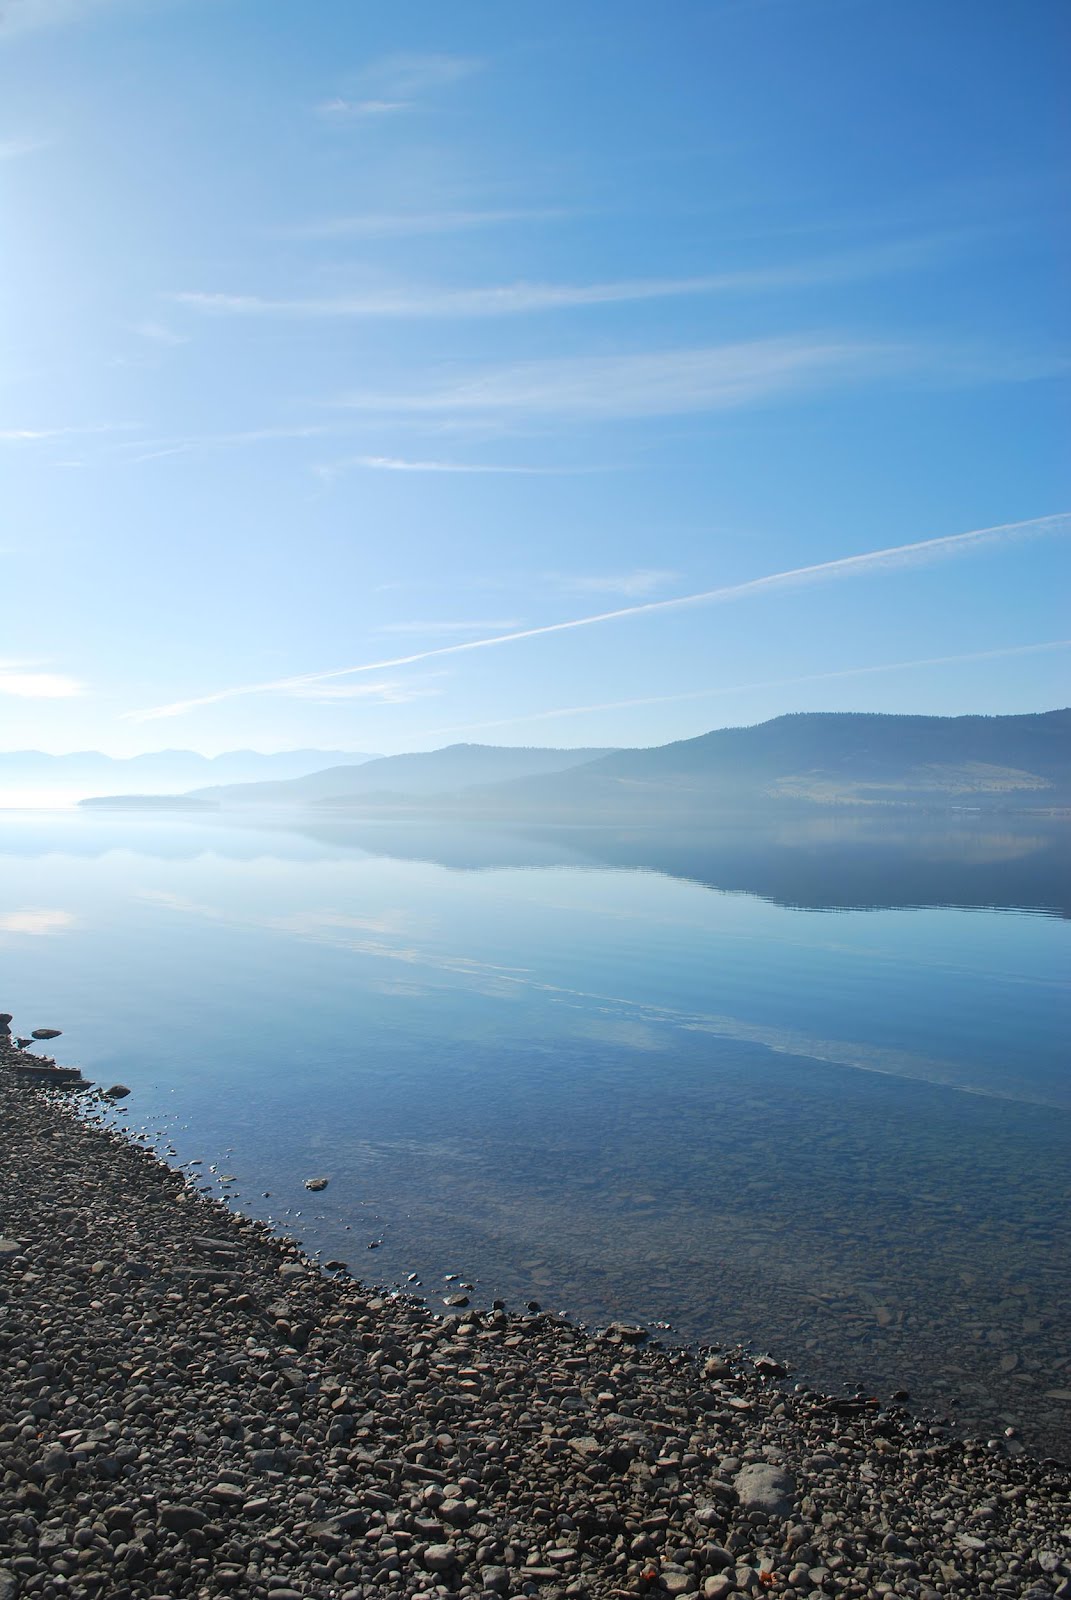 outside of the bubble: Pictures of Flathead Lake